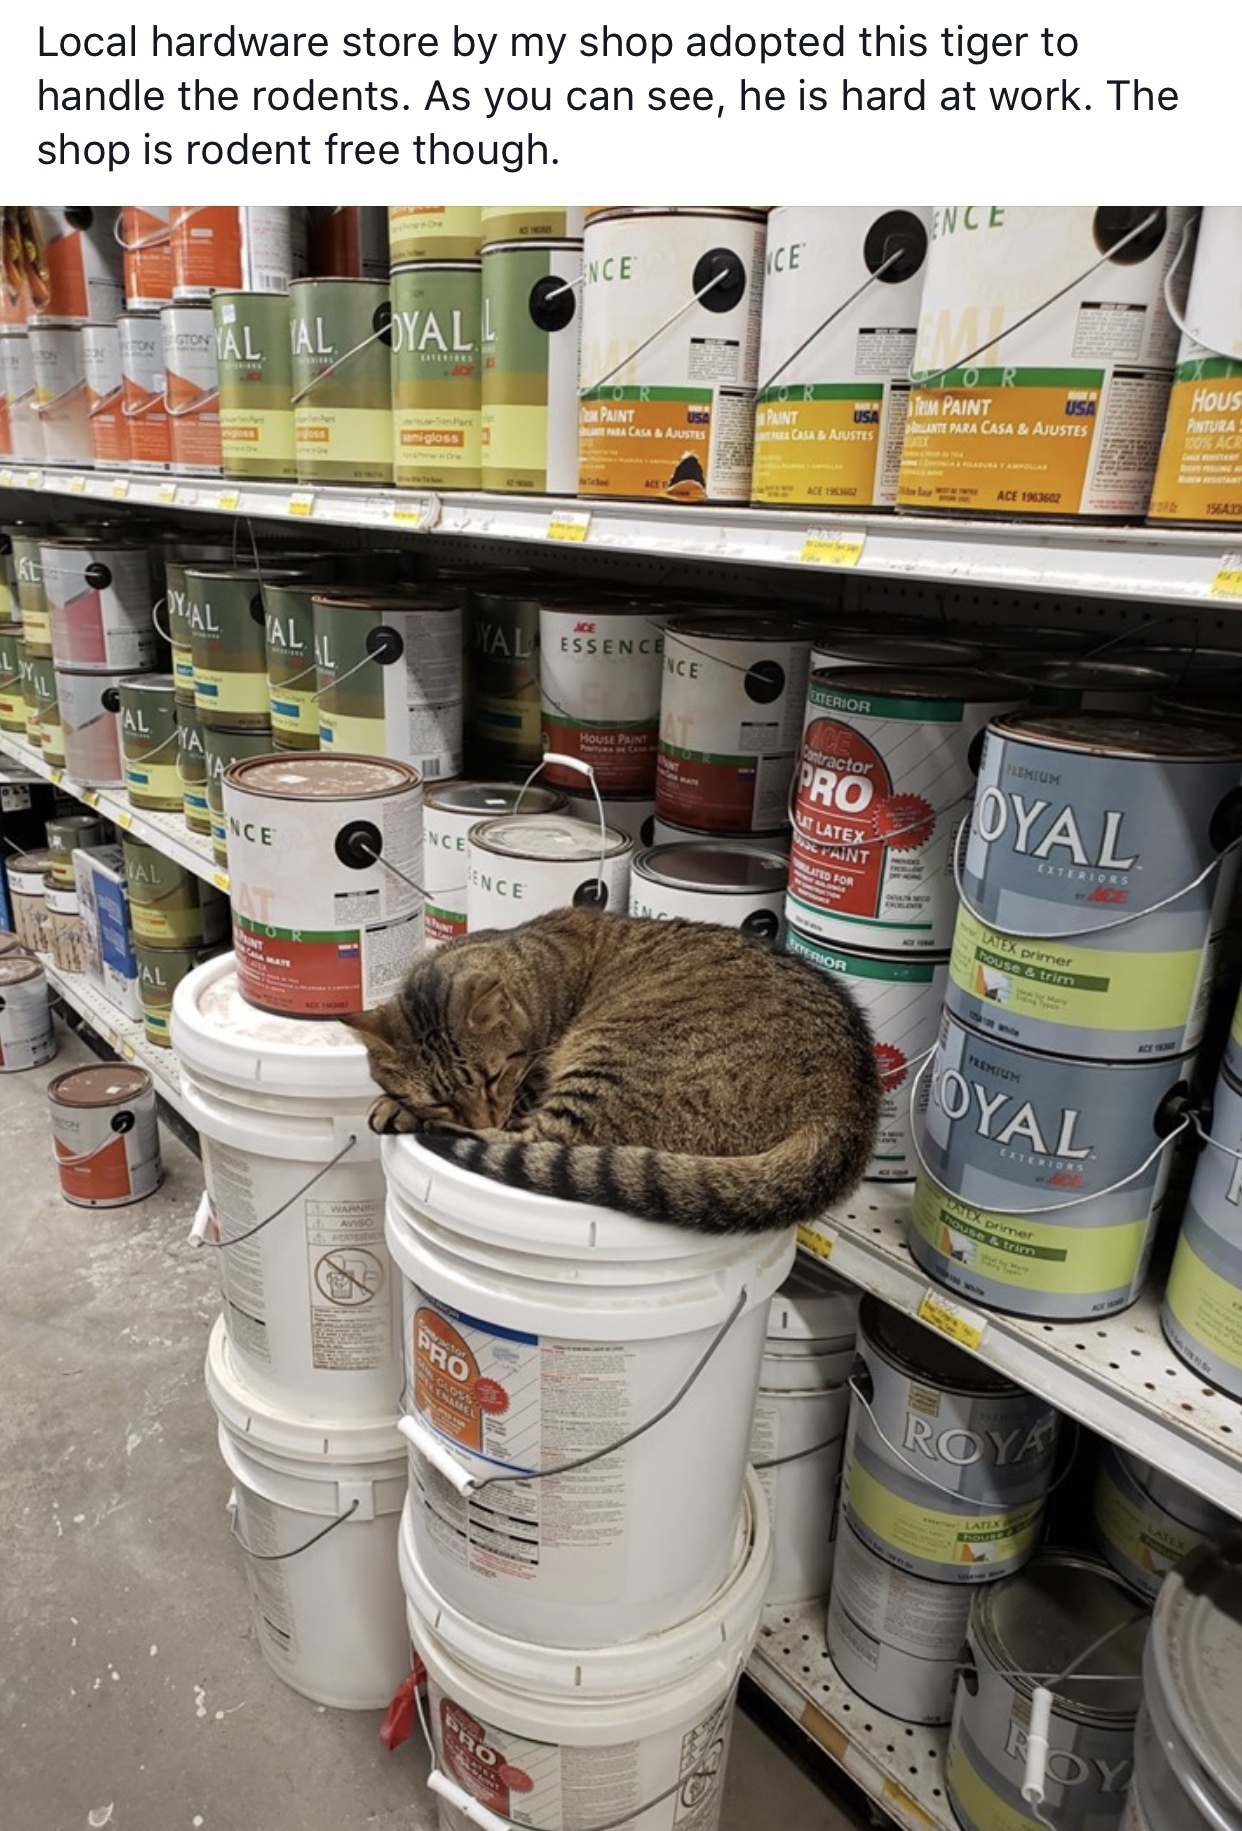 inventory - Local hardware store by my shop adopted this tiger to handle the rodents. As you can see, he is hard at work. The shop is rodent free though. Al Al Dyal Pyal